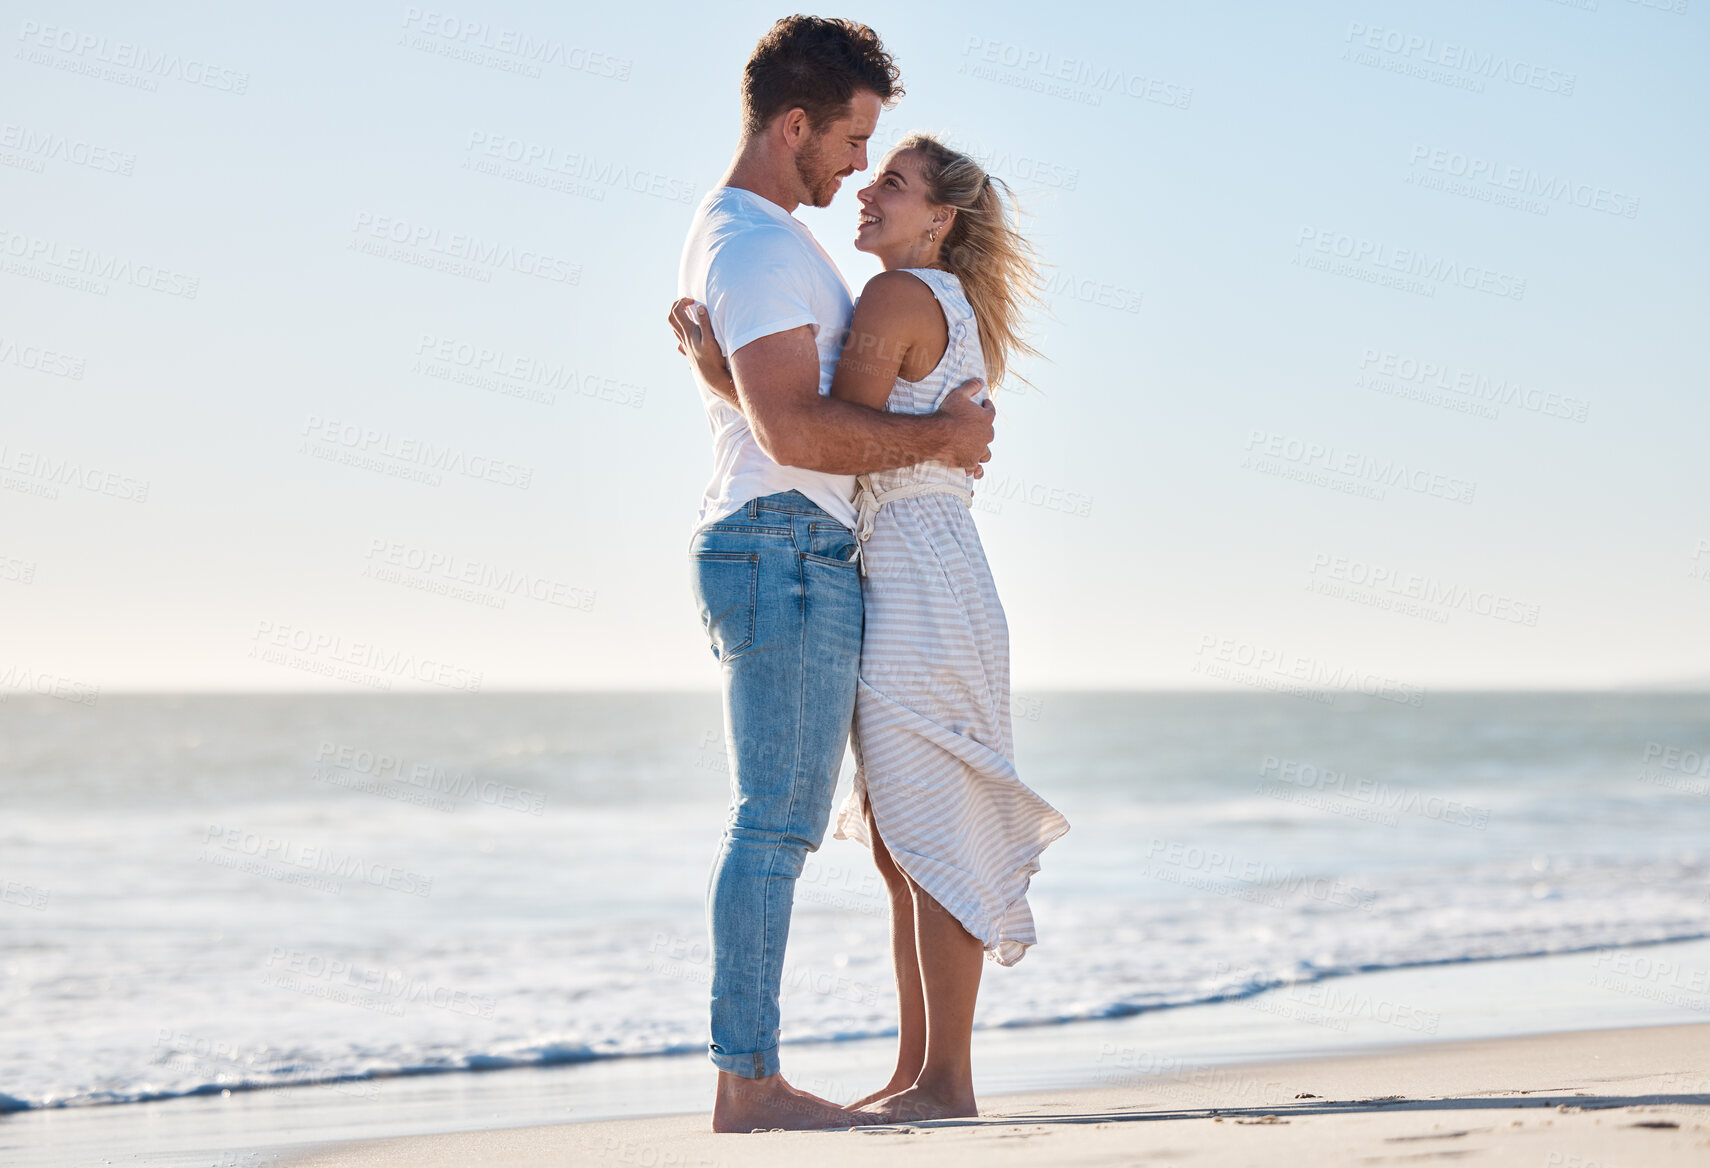 Buy stock photo Hug, beach and happy couple on a romantic vacation for love together by the ocean in Australia. Travel, romance and young man and woman embracing while on a seaside honeymoon holiday or adventure.